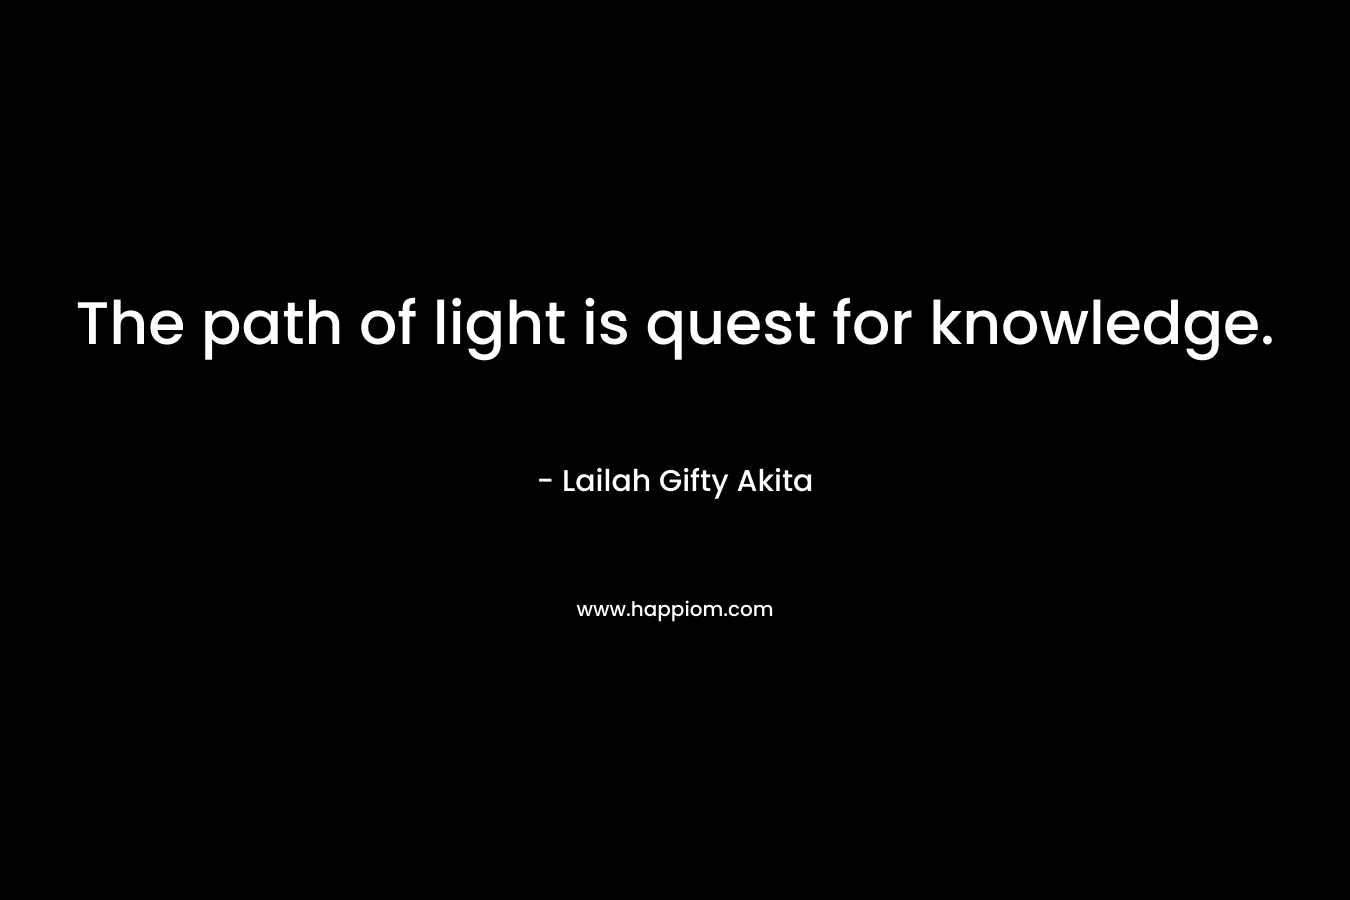 The path of light is quest for knowledge.